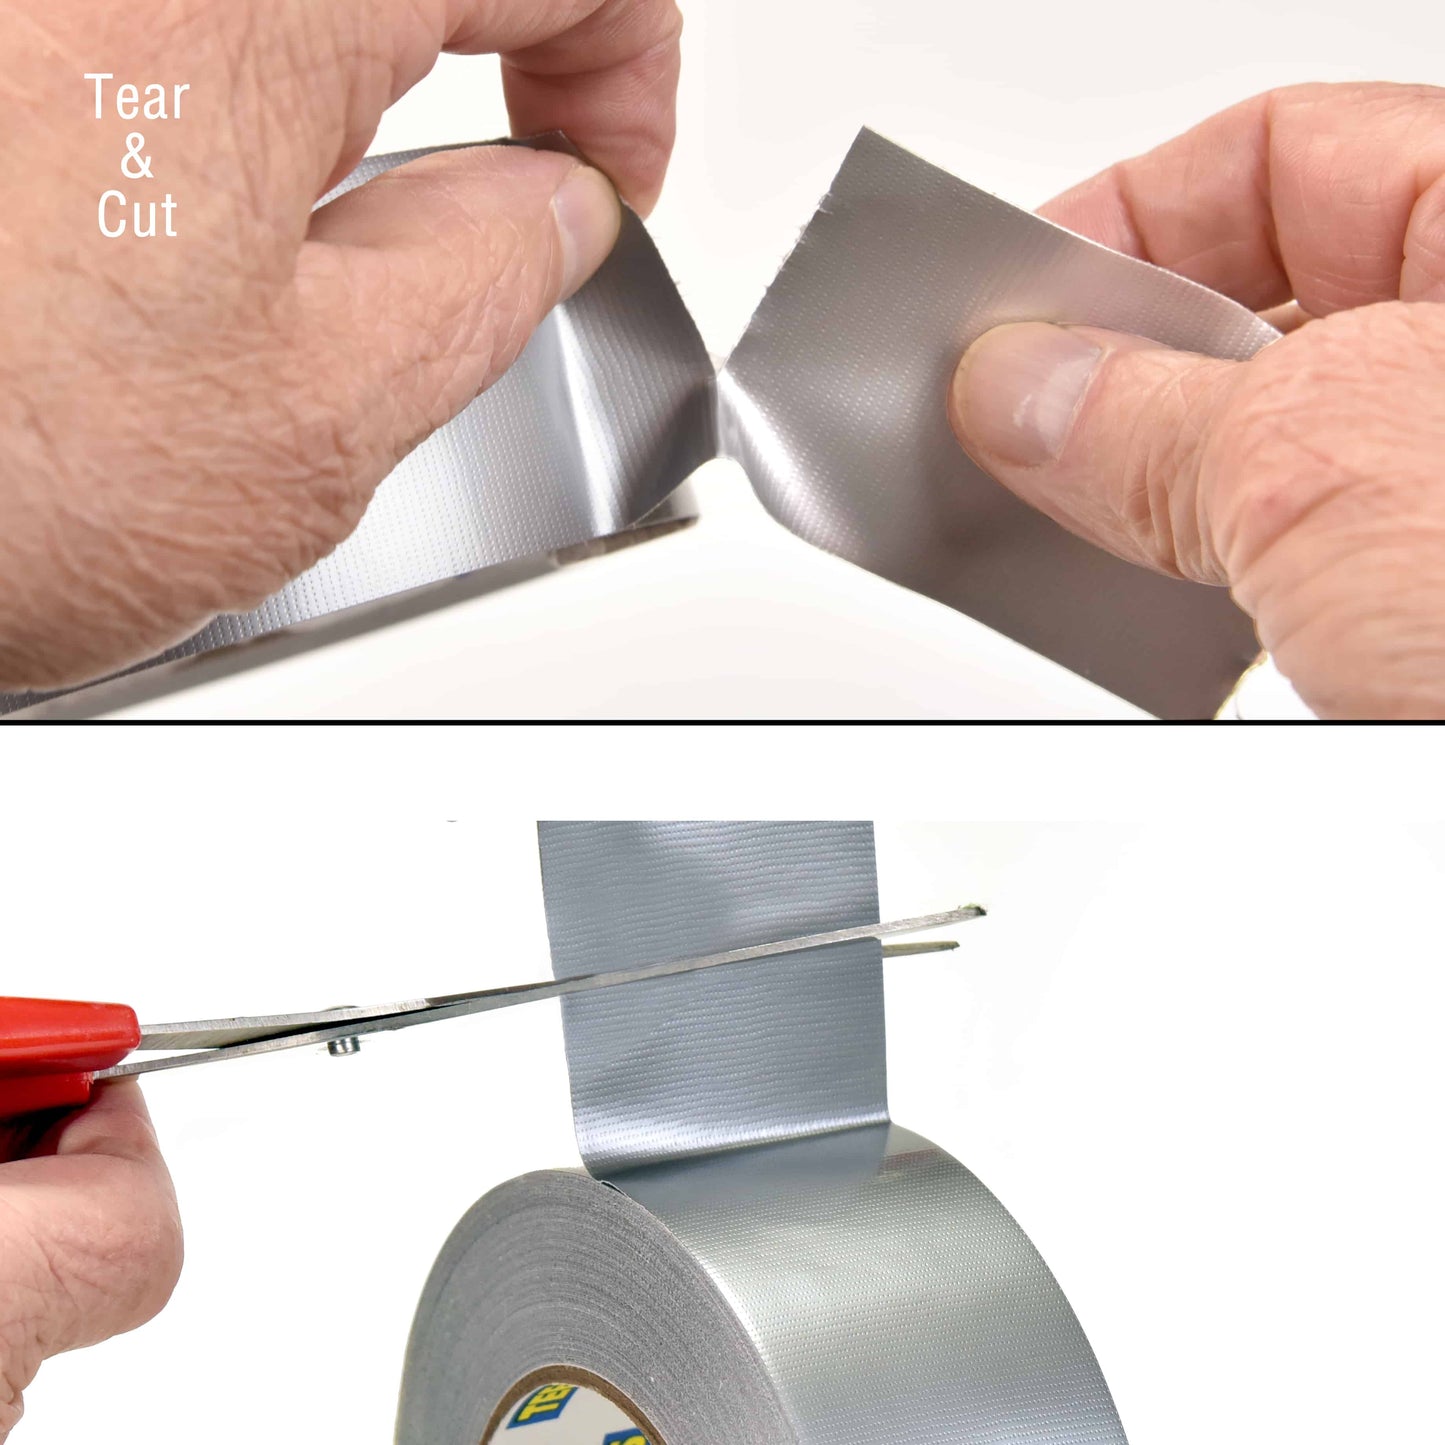 Power Duct Tape | 2-Pack Silver | 2 in X 40 Yds